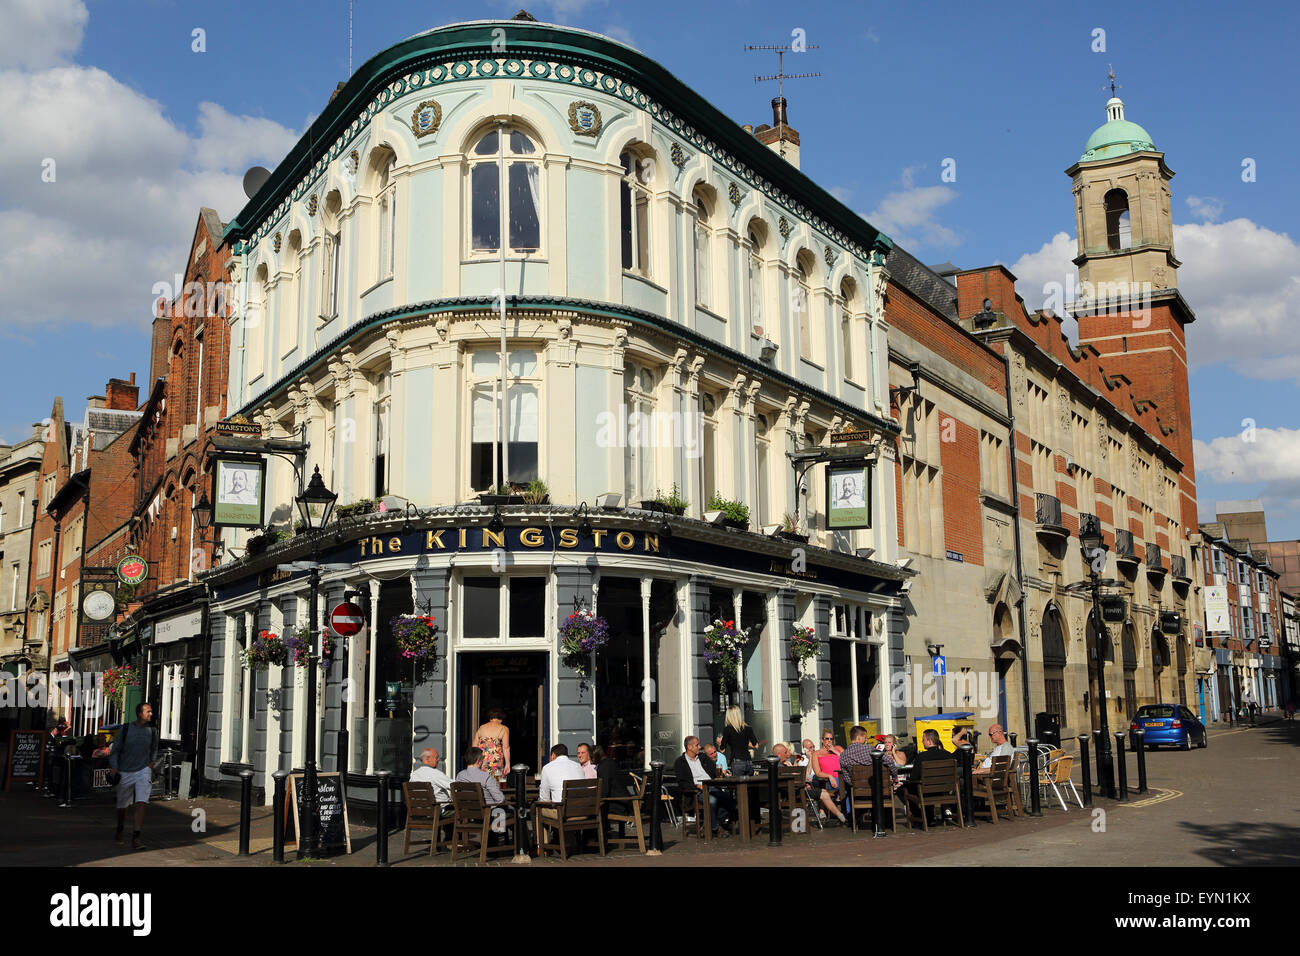 The Kingston pub in Hull, England. The building stands on a corner by Trinity Square. Stock Photo